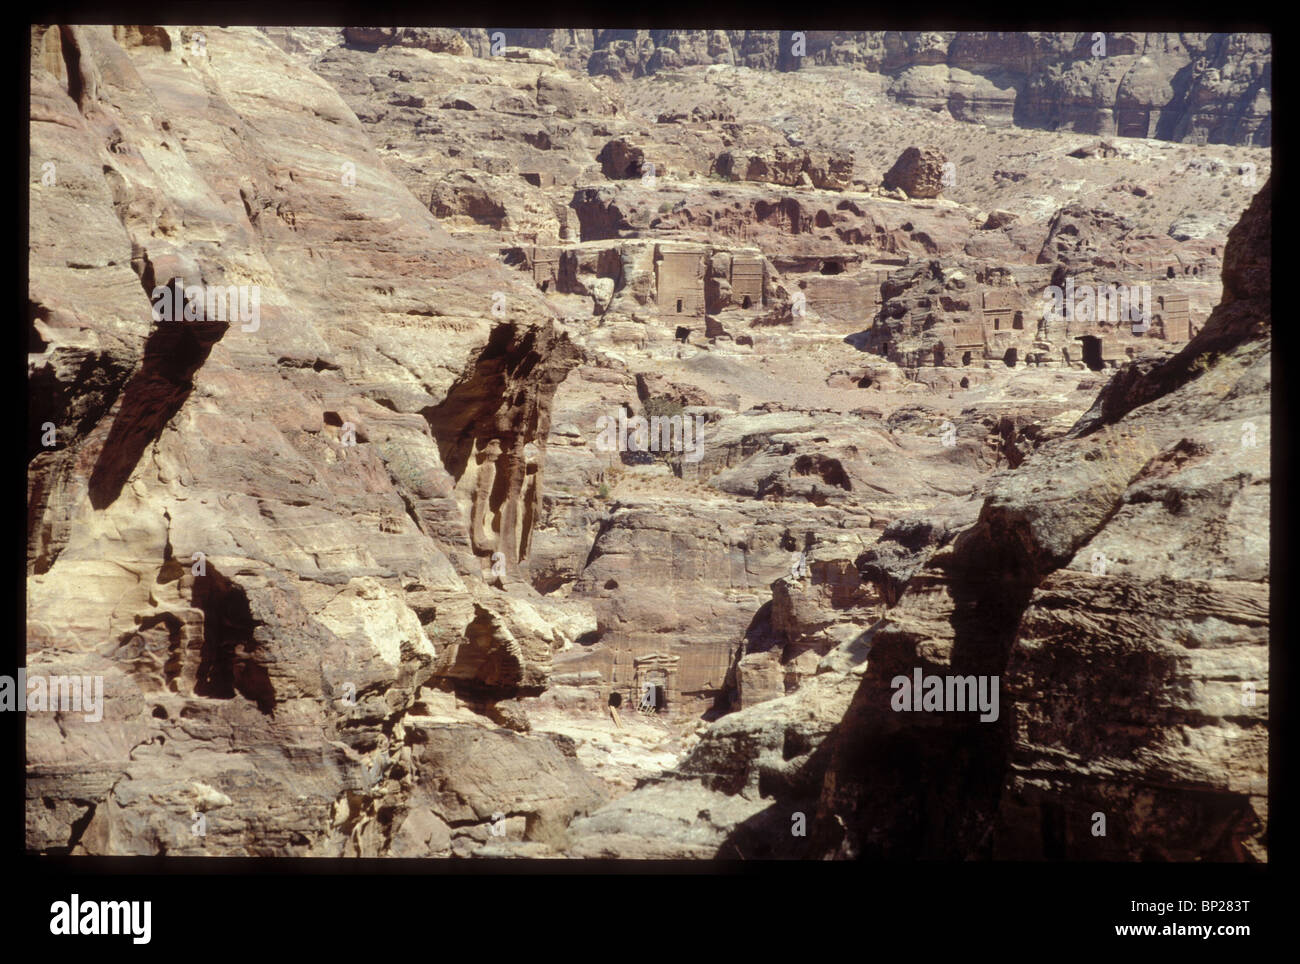 1810. PETRA, GENERAL VIEW OF THE AREA Stock Photo